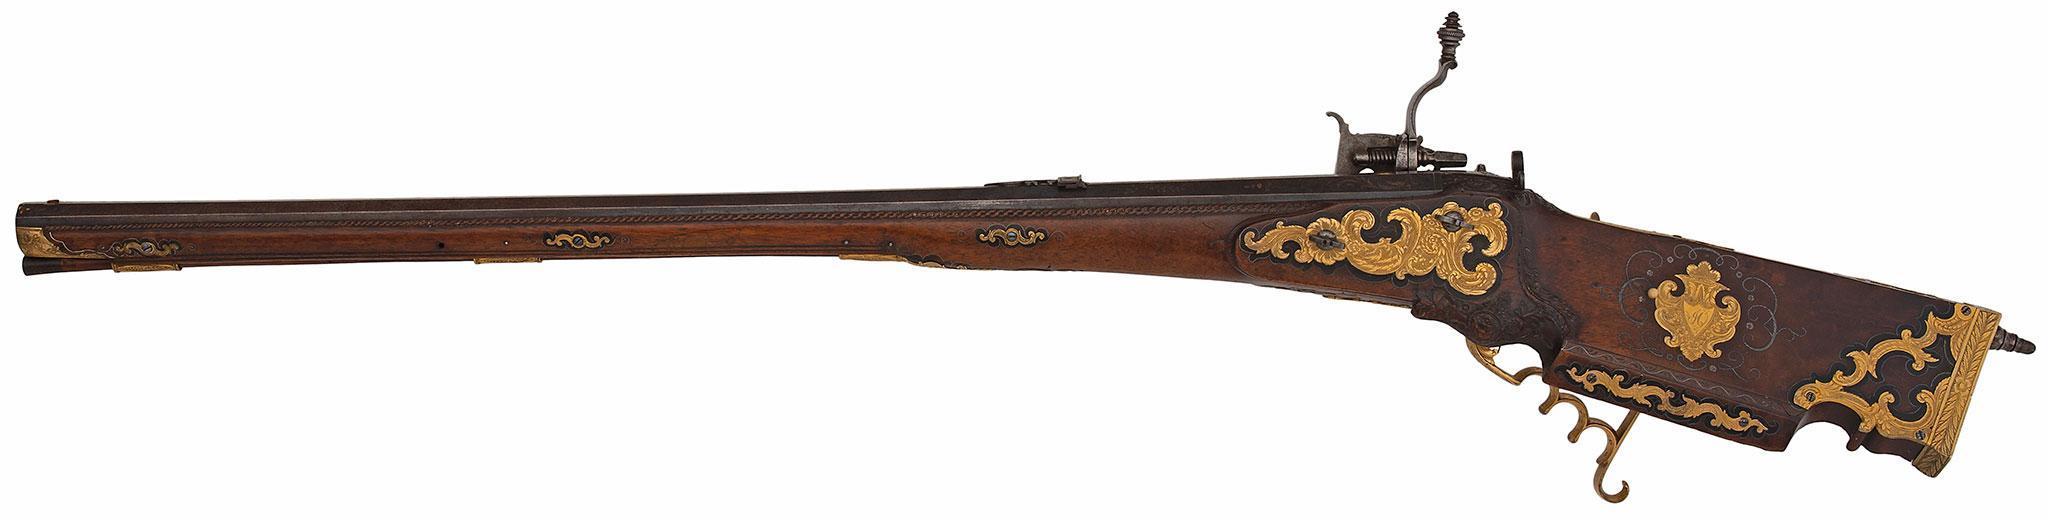 A Very Fine Quality Gilt Bronze Mounted, Silver And Gold Inlaid Austrian Wheel-lock Sporting Rifle